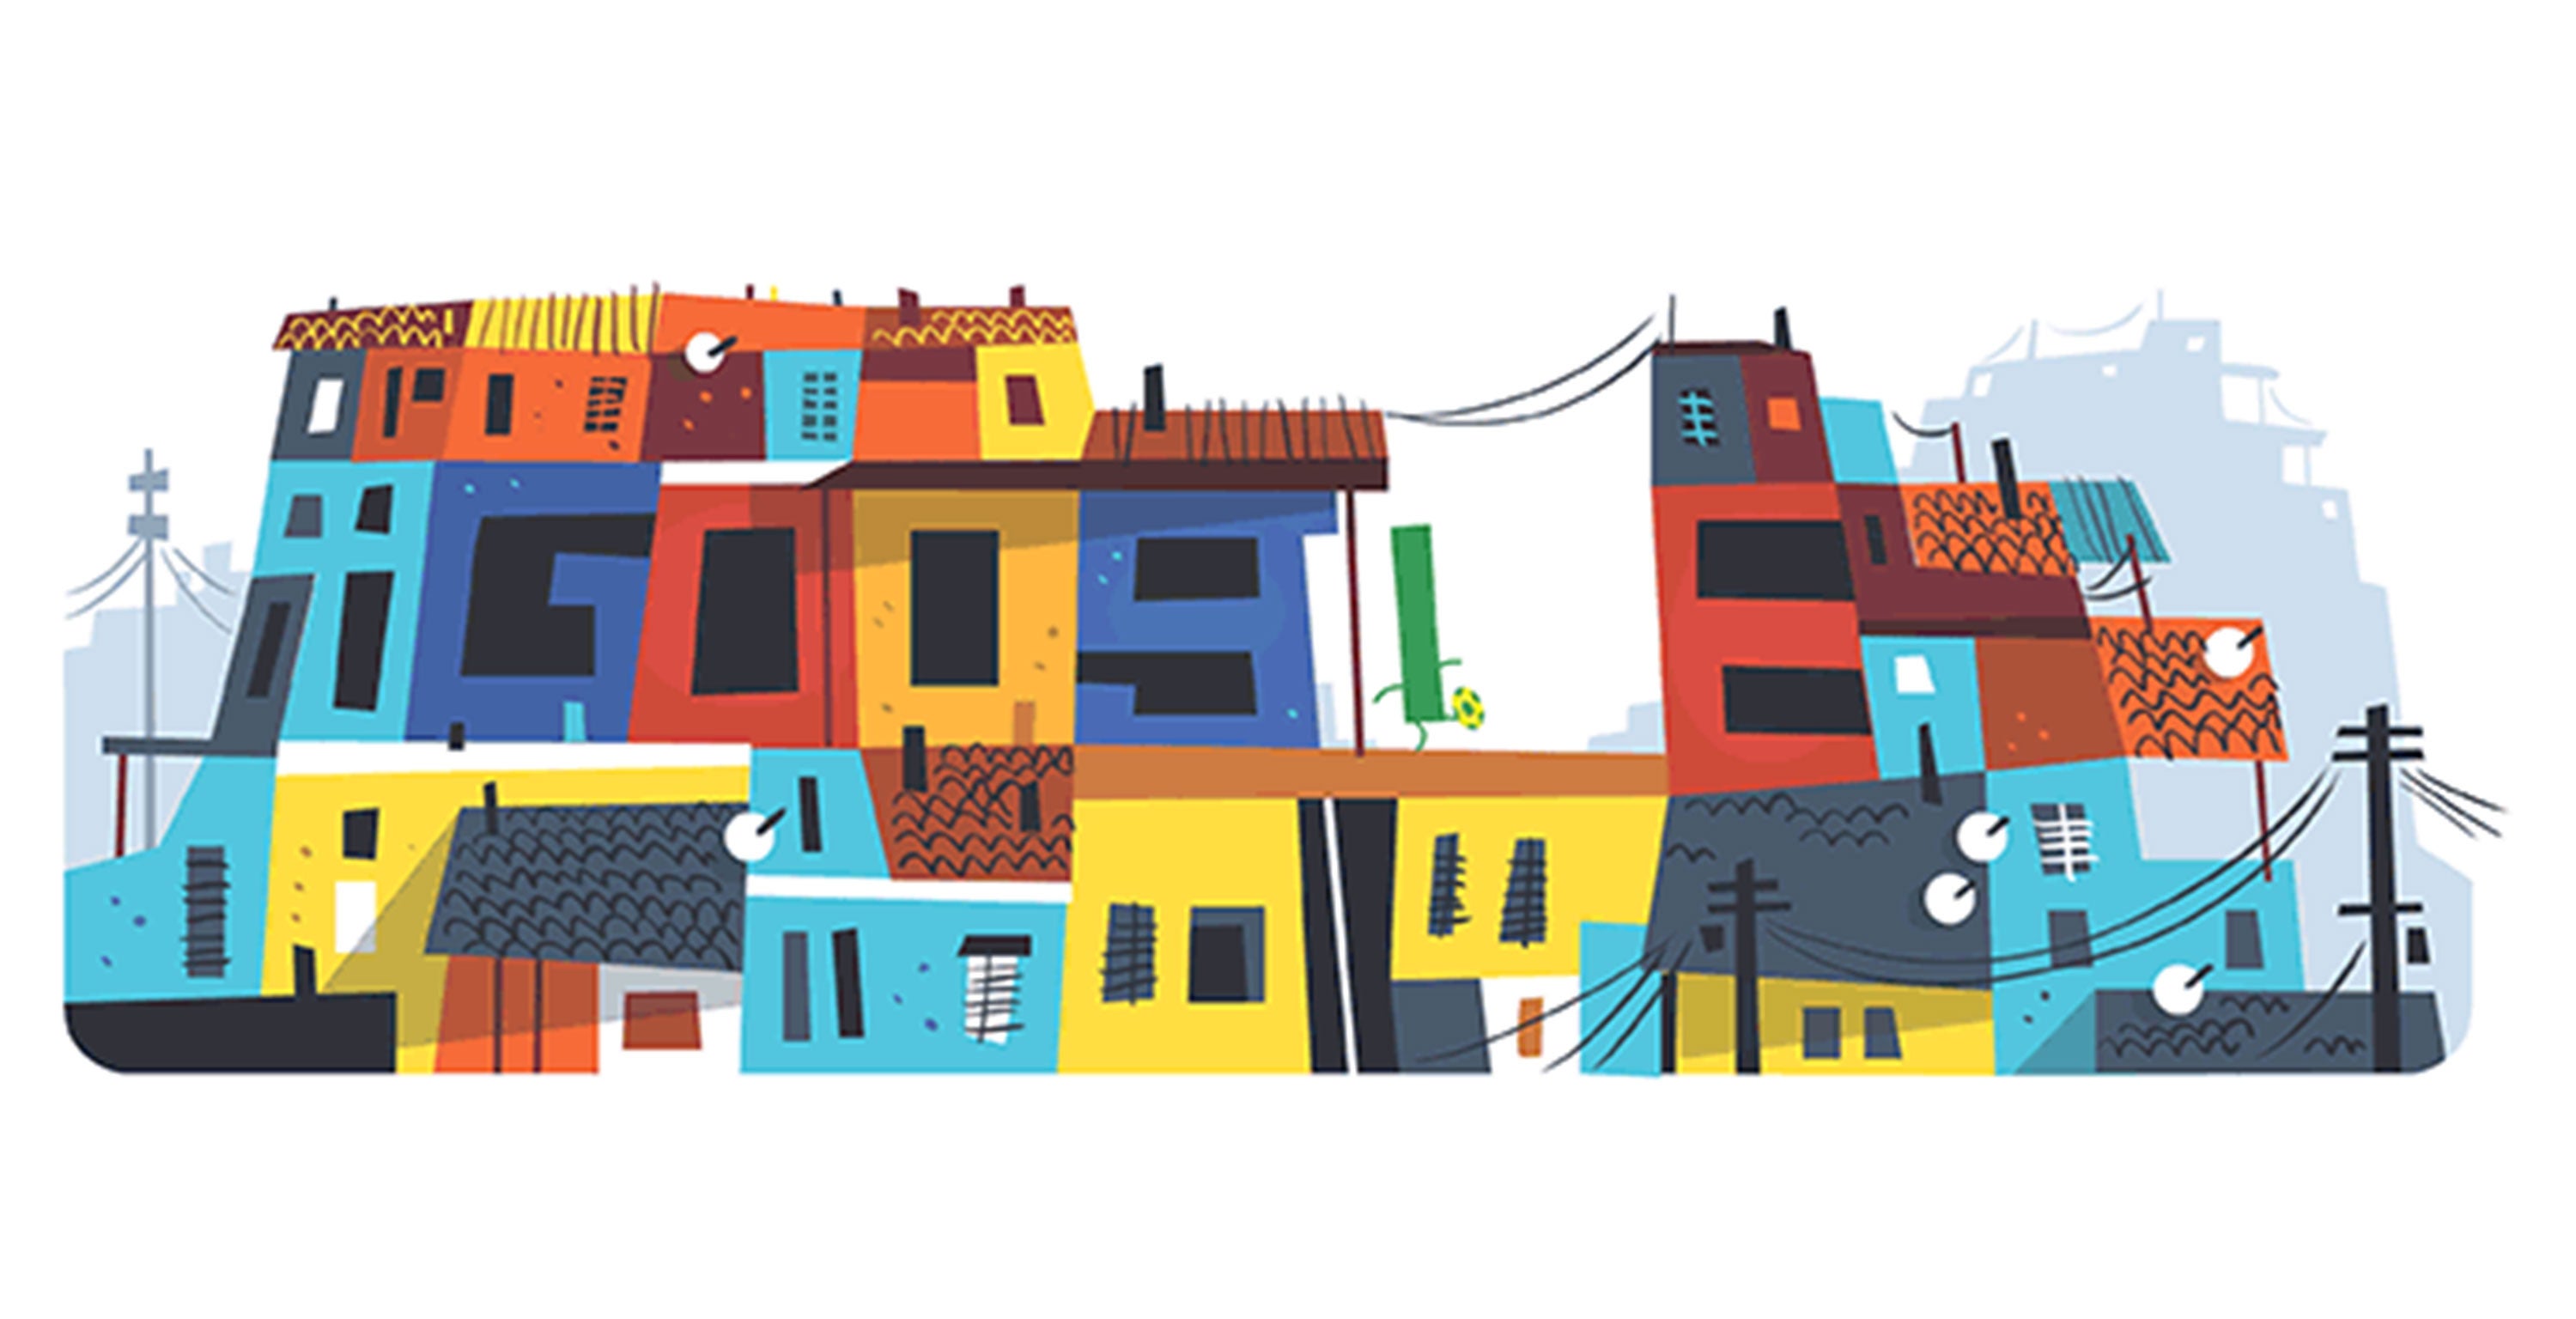 18 June 2014: Google has marked the seventh day of the 2014 World Cup with a doodle highlighting Brazil's favelas 